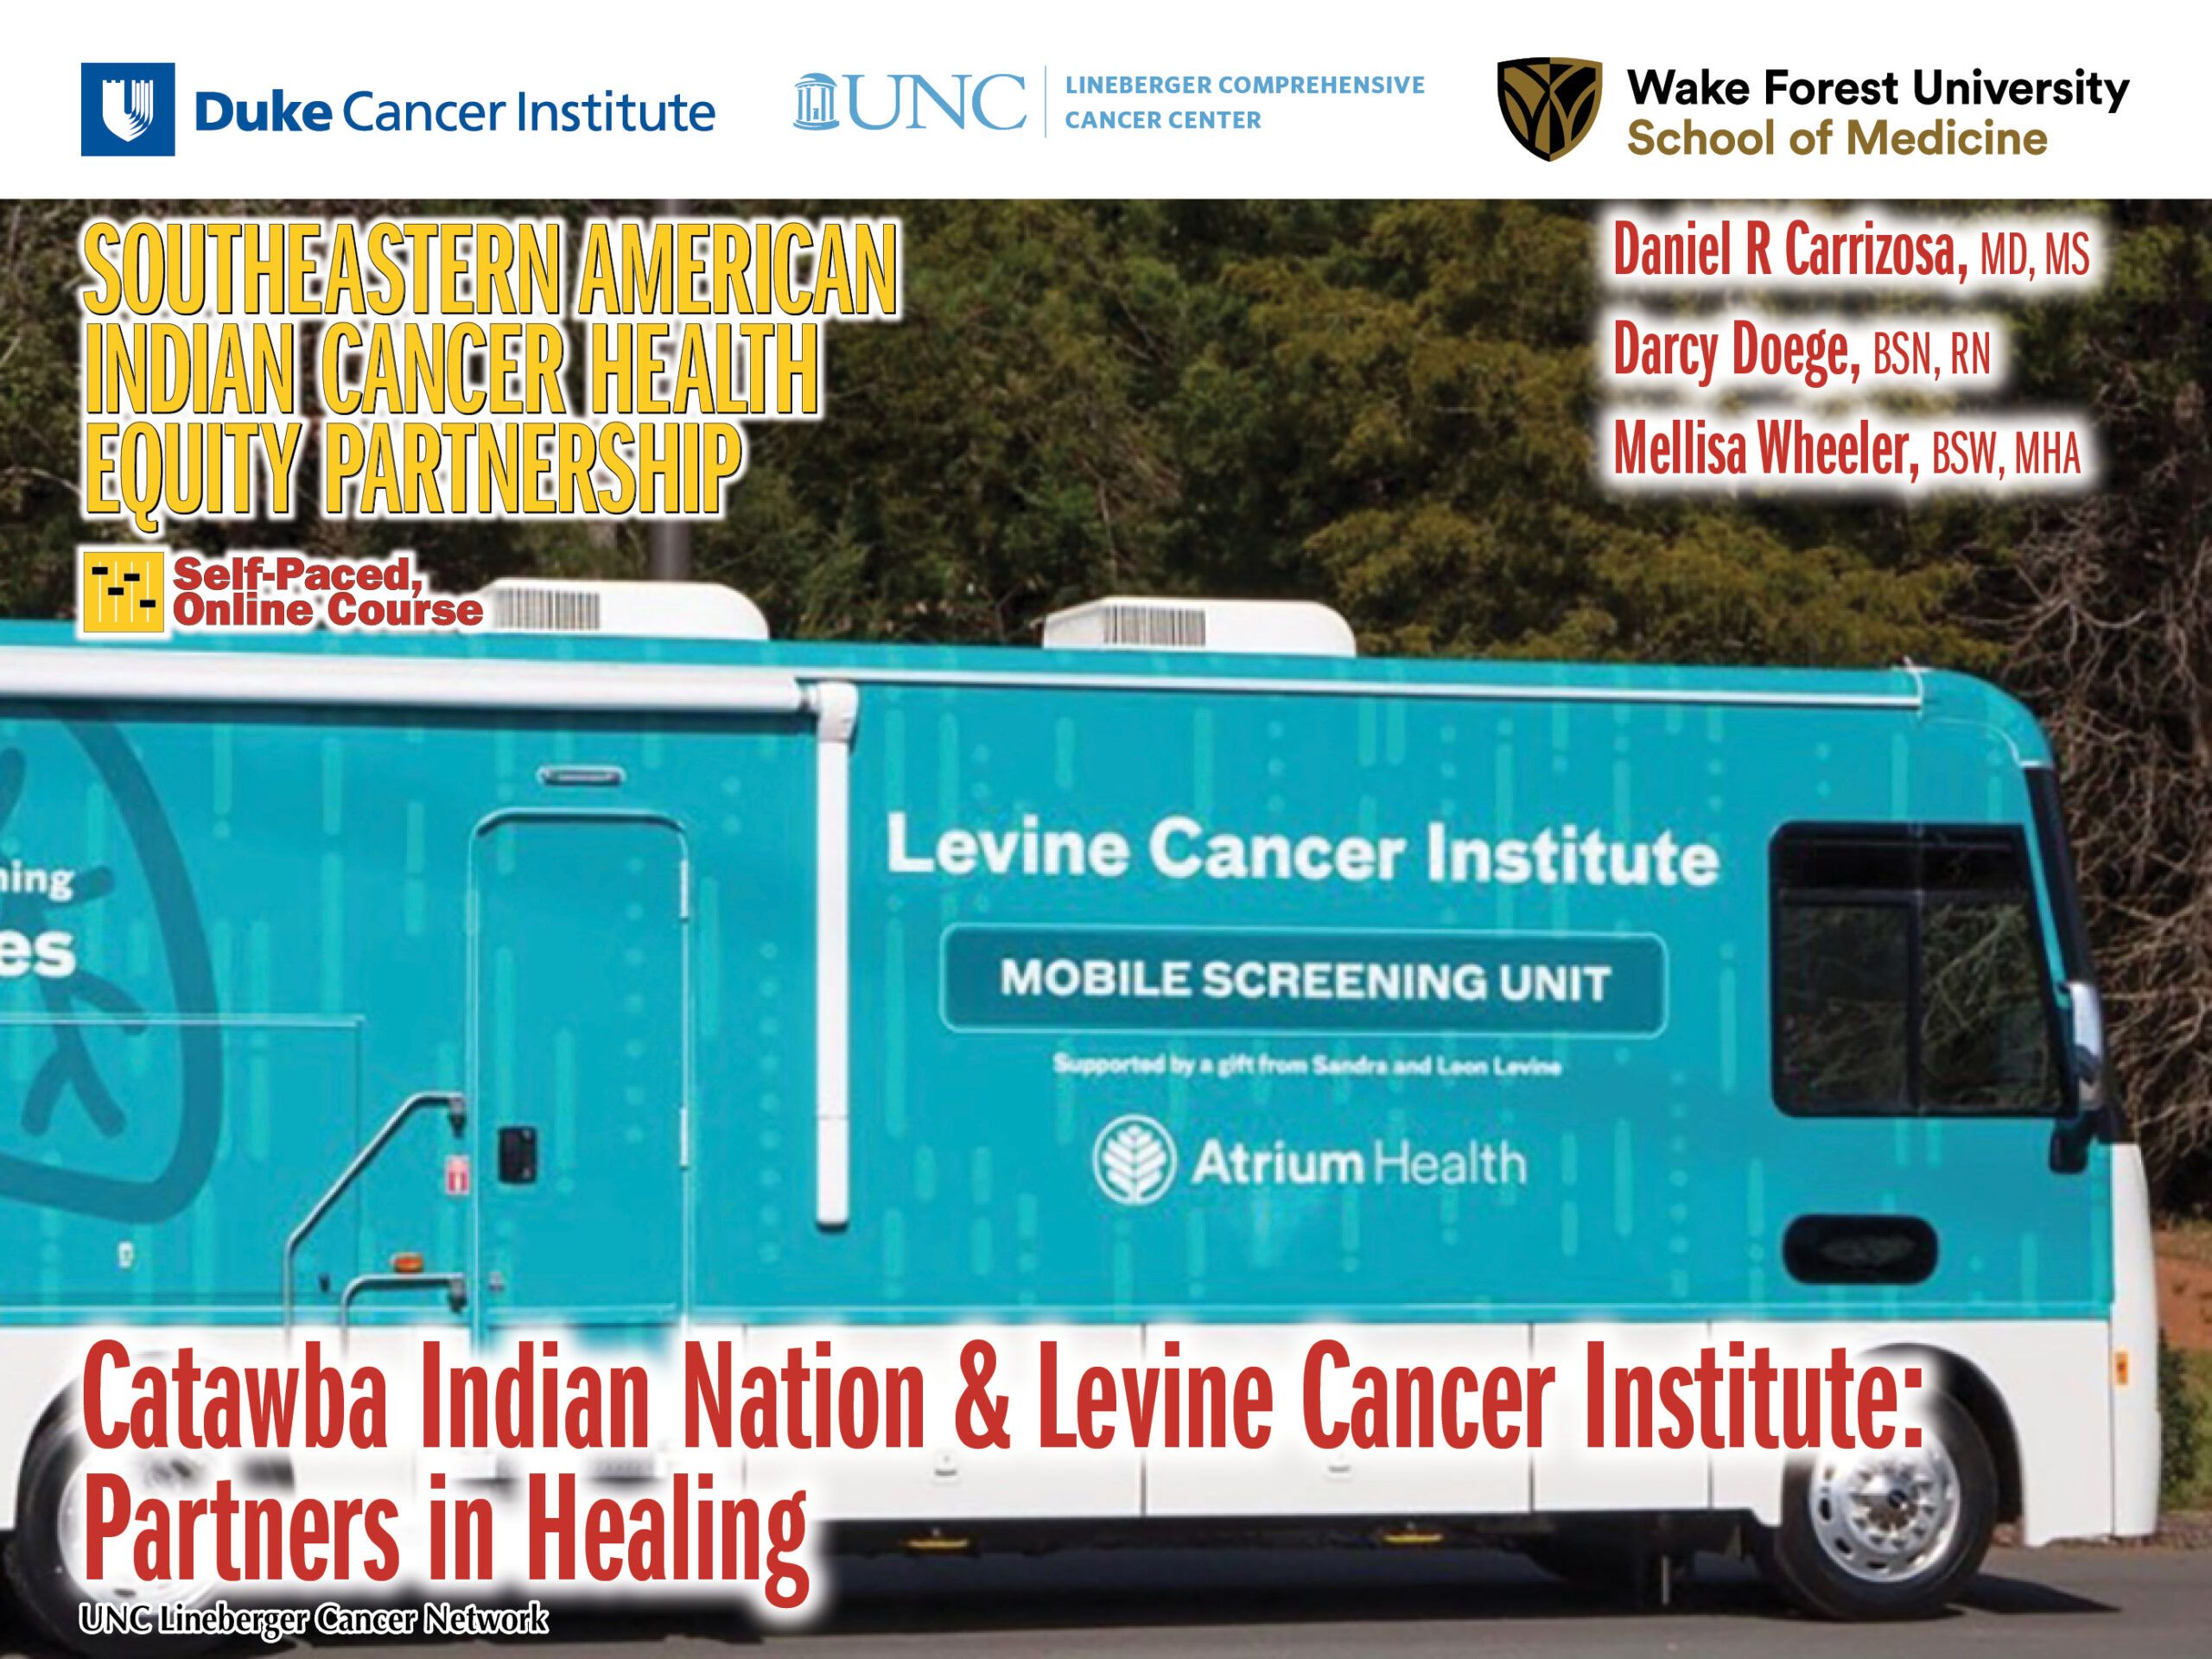 Feature image for Catawba Indian Nation & Lung Cancer Institute: Partners in Healing